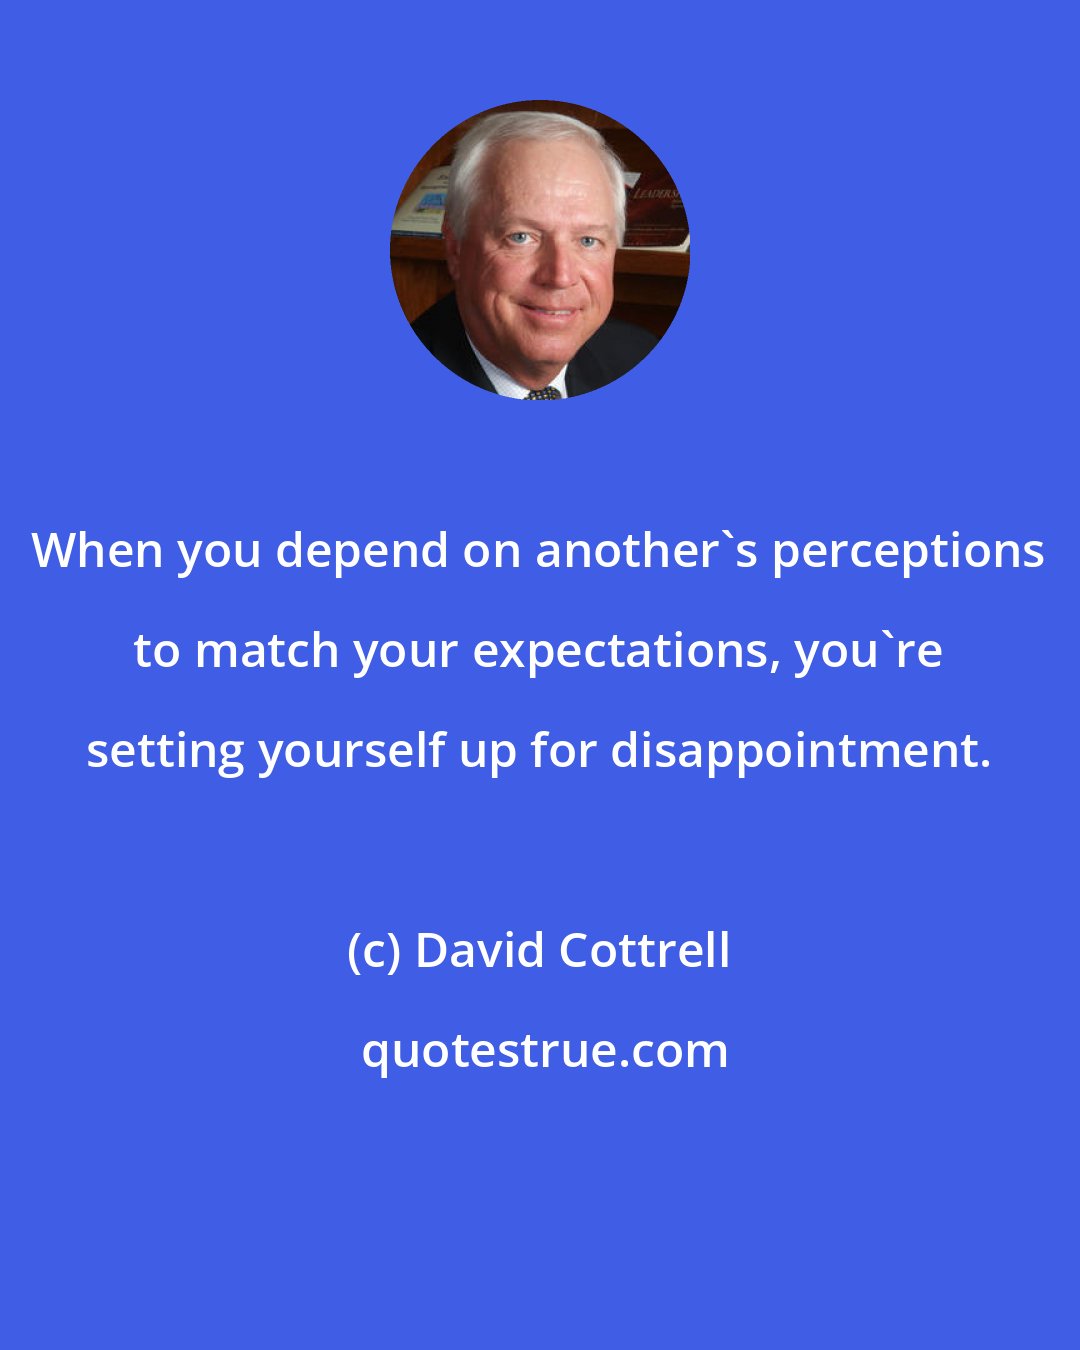 David Cottrell: When you depend on another's perceptions to match your expectations, you're setting yourself up for disappointment.